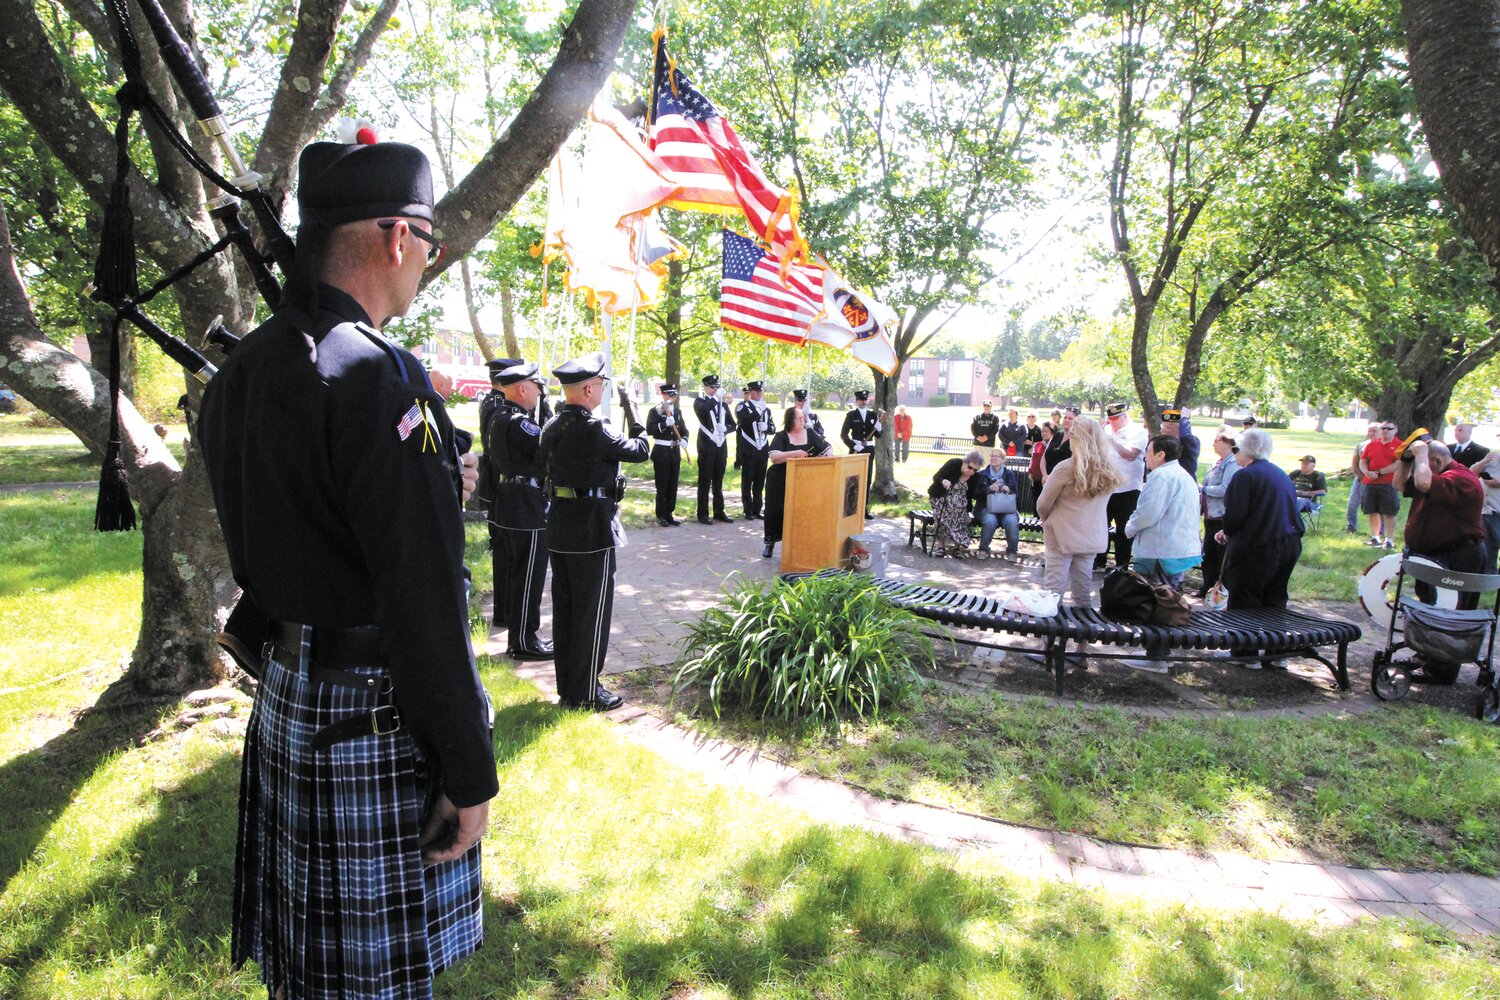 REFLECTIVE CEREMONY: The music of a bagpiper lent solemnity to the Memorial Day observance held Monday at Veterans Park on the grounds of Veterans Middle School. (Warwick Beacon photos)